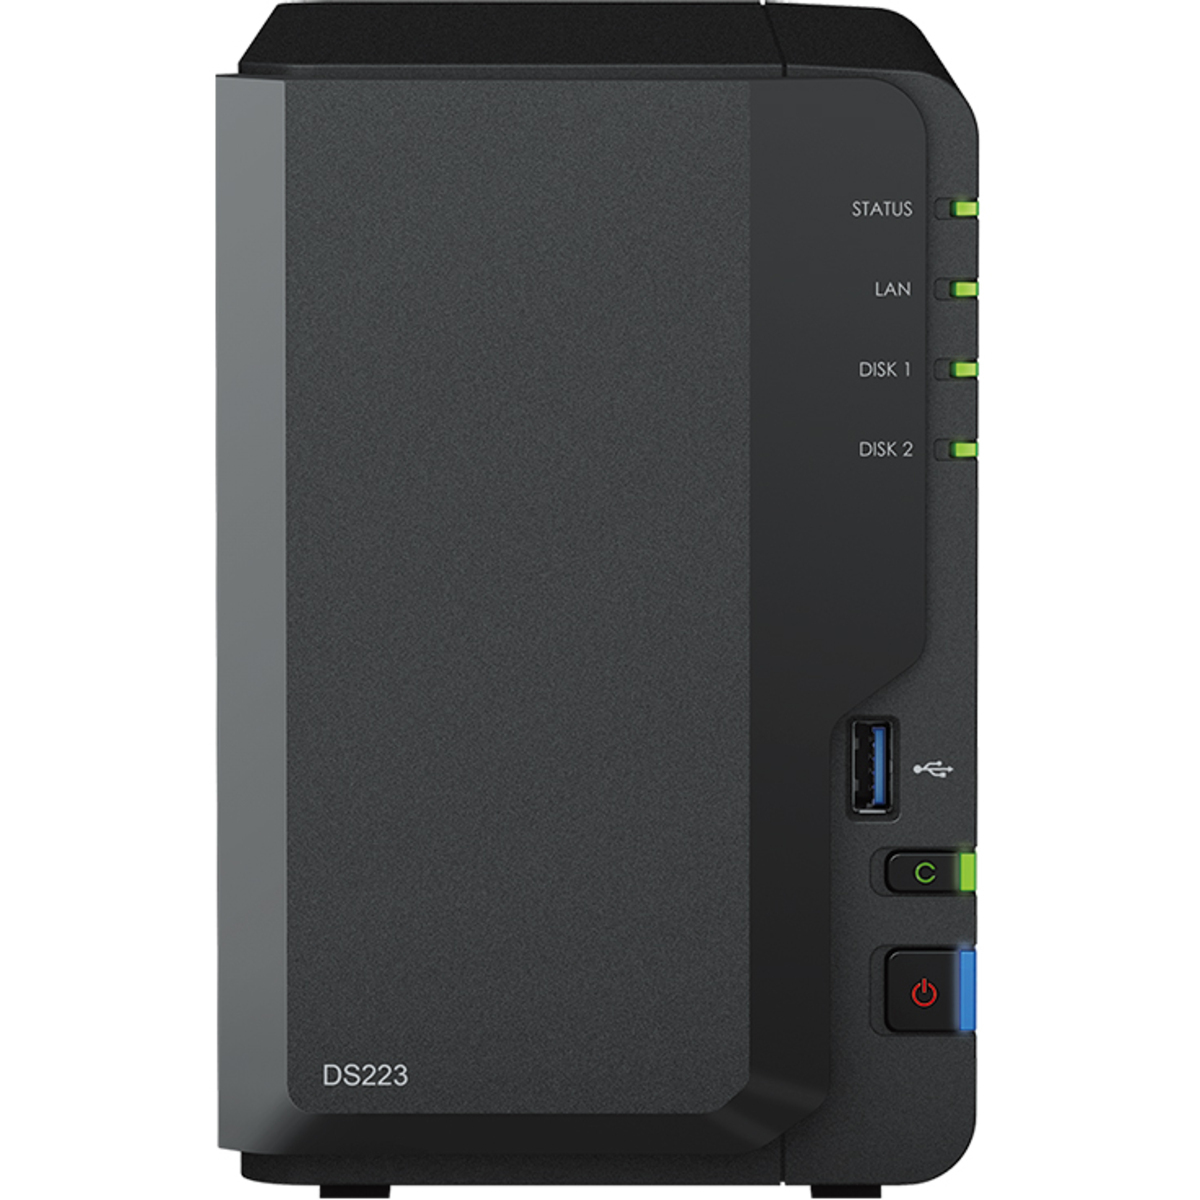 Synology DiskStation DS223 8tb 2-Bay Desktop Personal / Basic Home / Small Office NAS - Network Attached Storage Device 1x8tb Synology Plus Series HAT3310-8T 3.5 7200rpm SATA 6Gb/s HDD NAS Class Drives Installed - Burn-In Tested DiskStation DS223